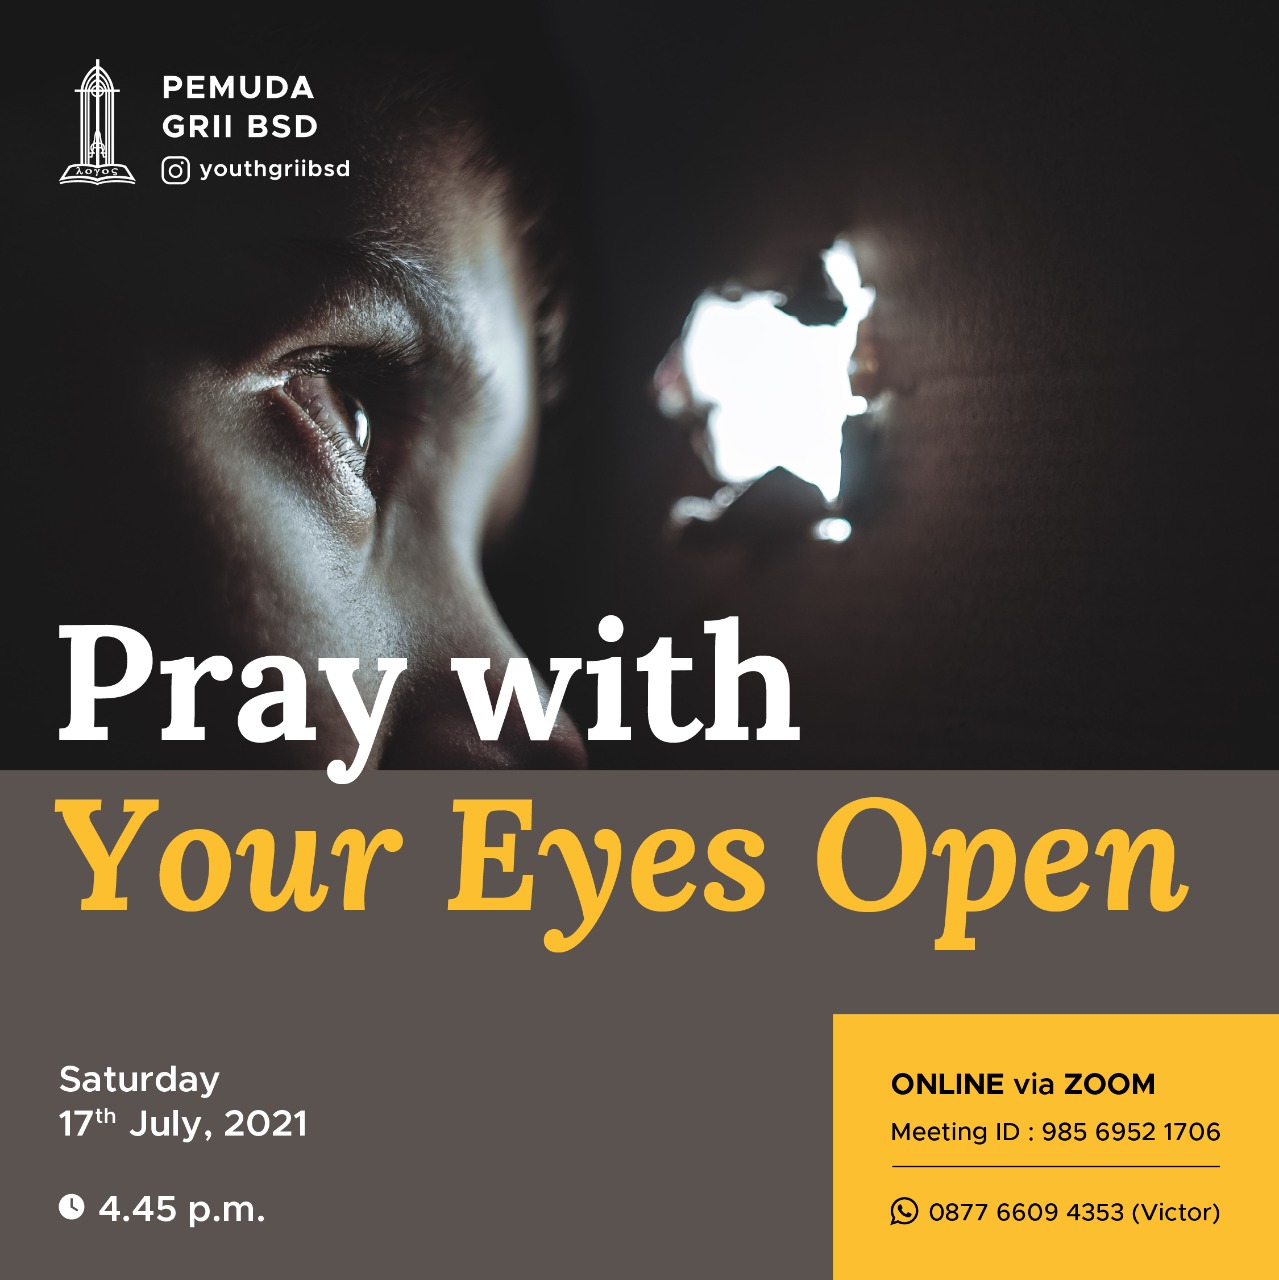 Pray with Your Eyes Open